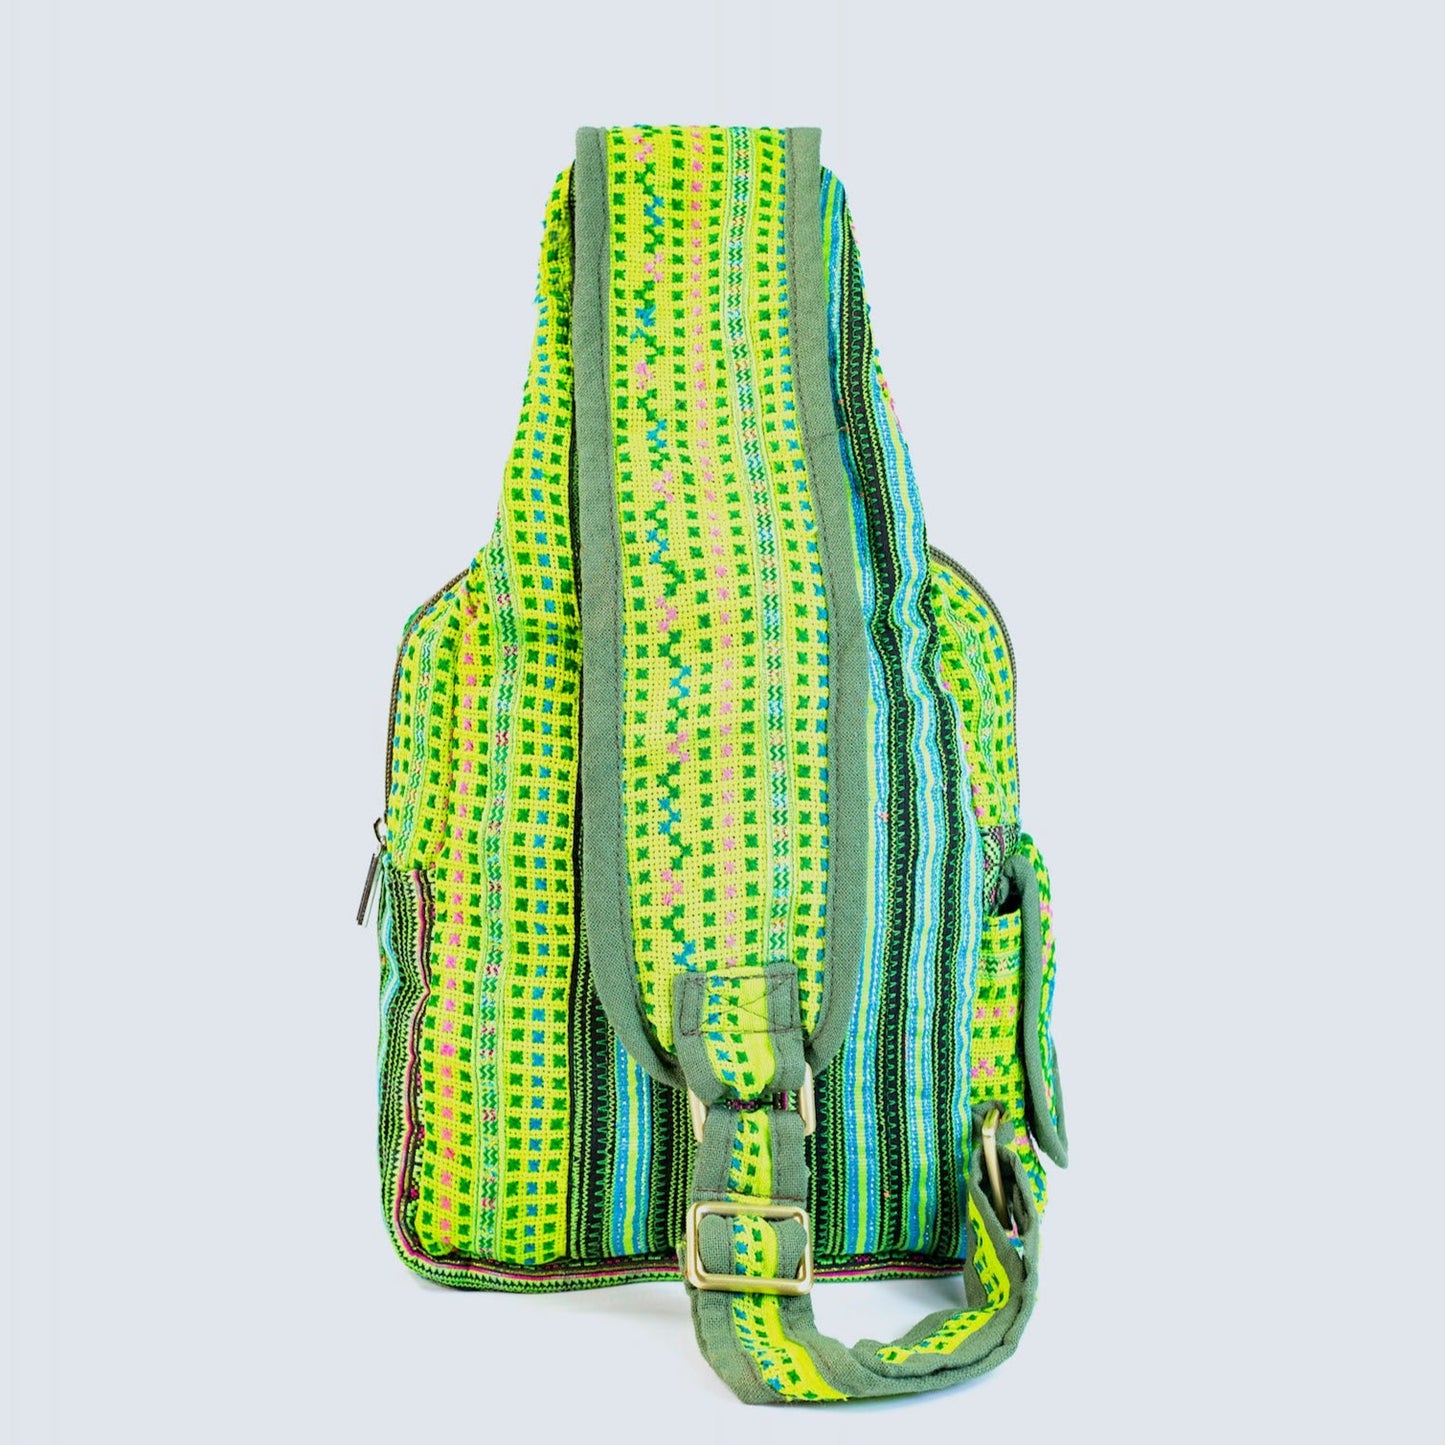 Boho-style linen, embroidery Sling bag, H'mong tribal pattern in Neon GREEN